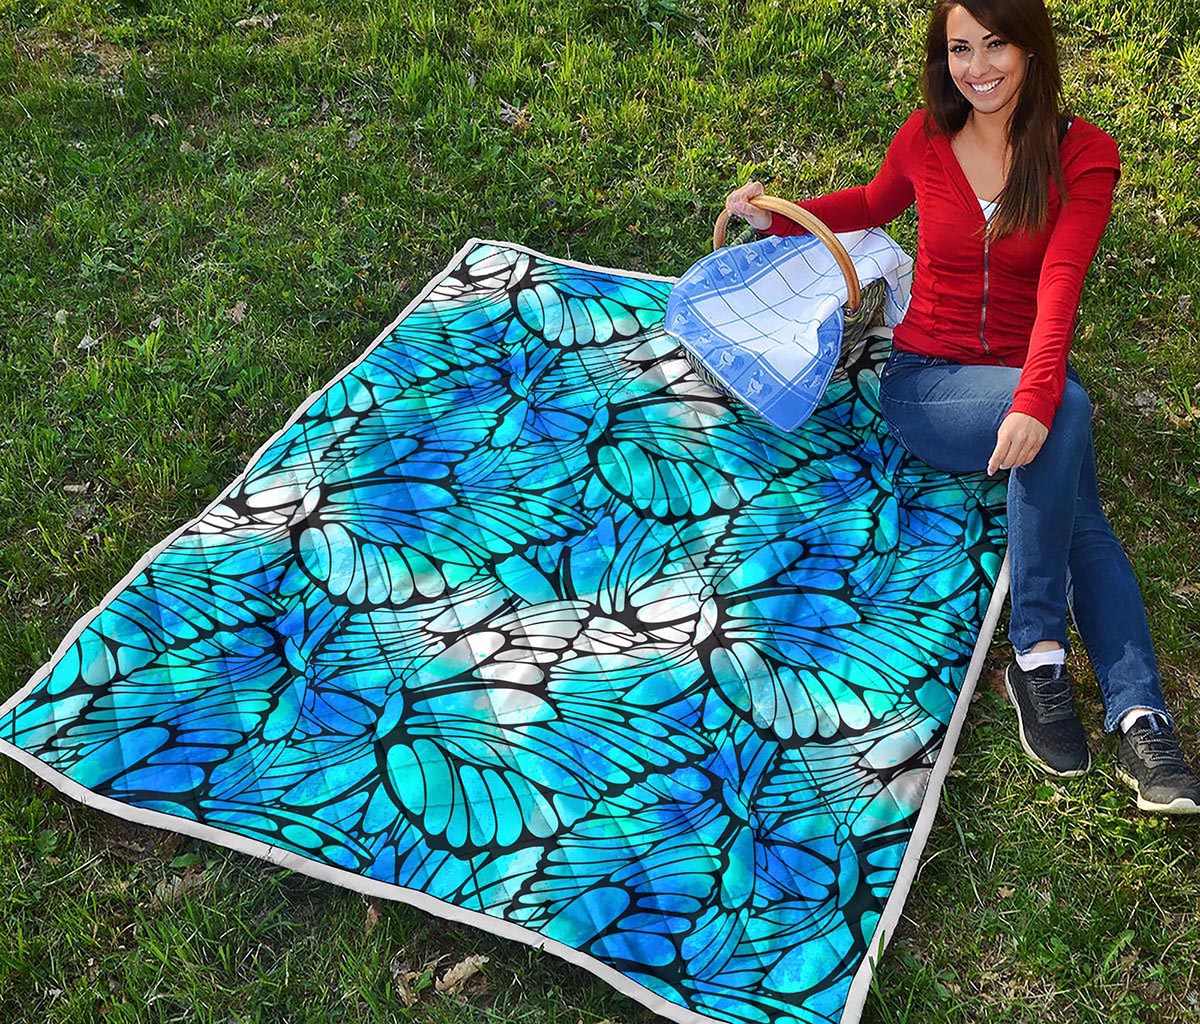 Blue Butterfly Wings Pattern Print Quilt